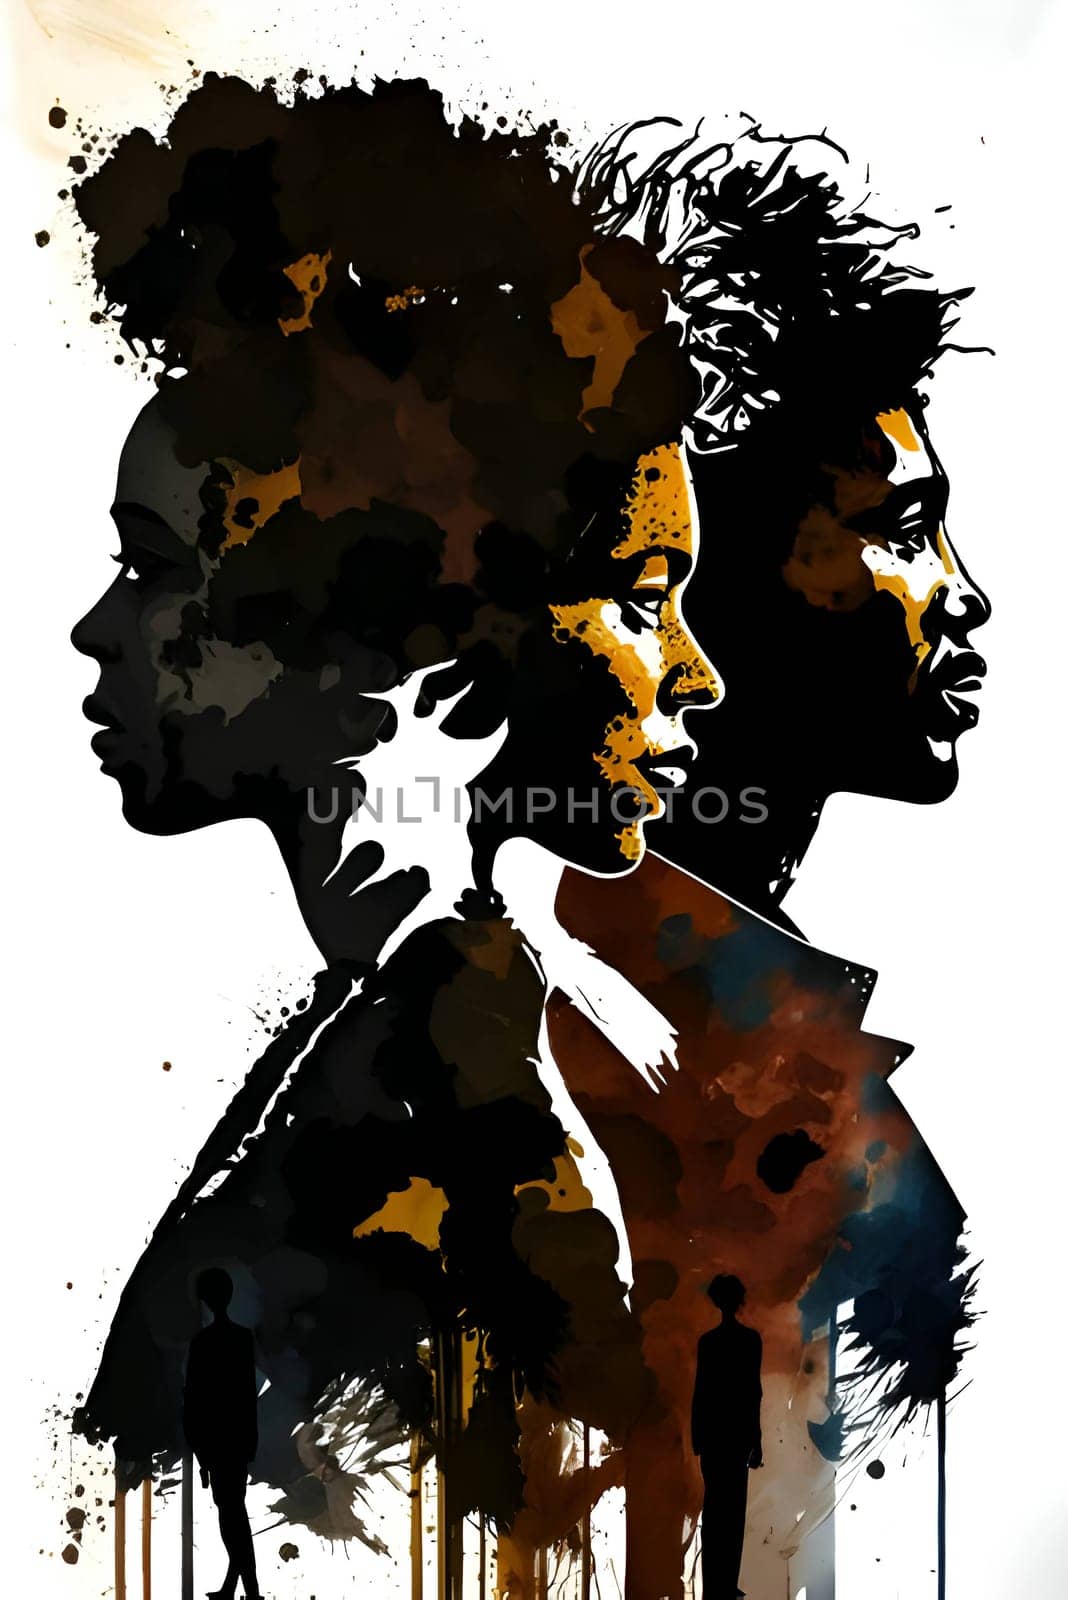 Vector illustration of people in colorful silhouette against a clean white background, capturing graceful forms.